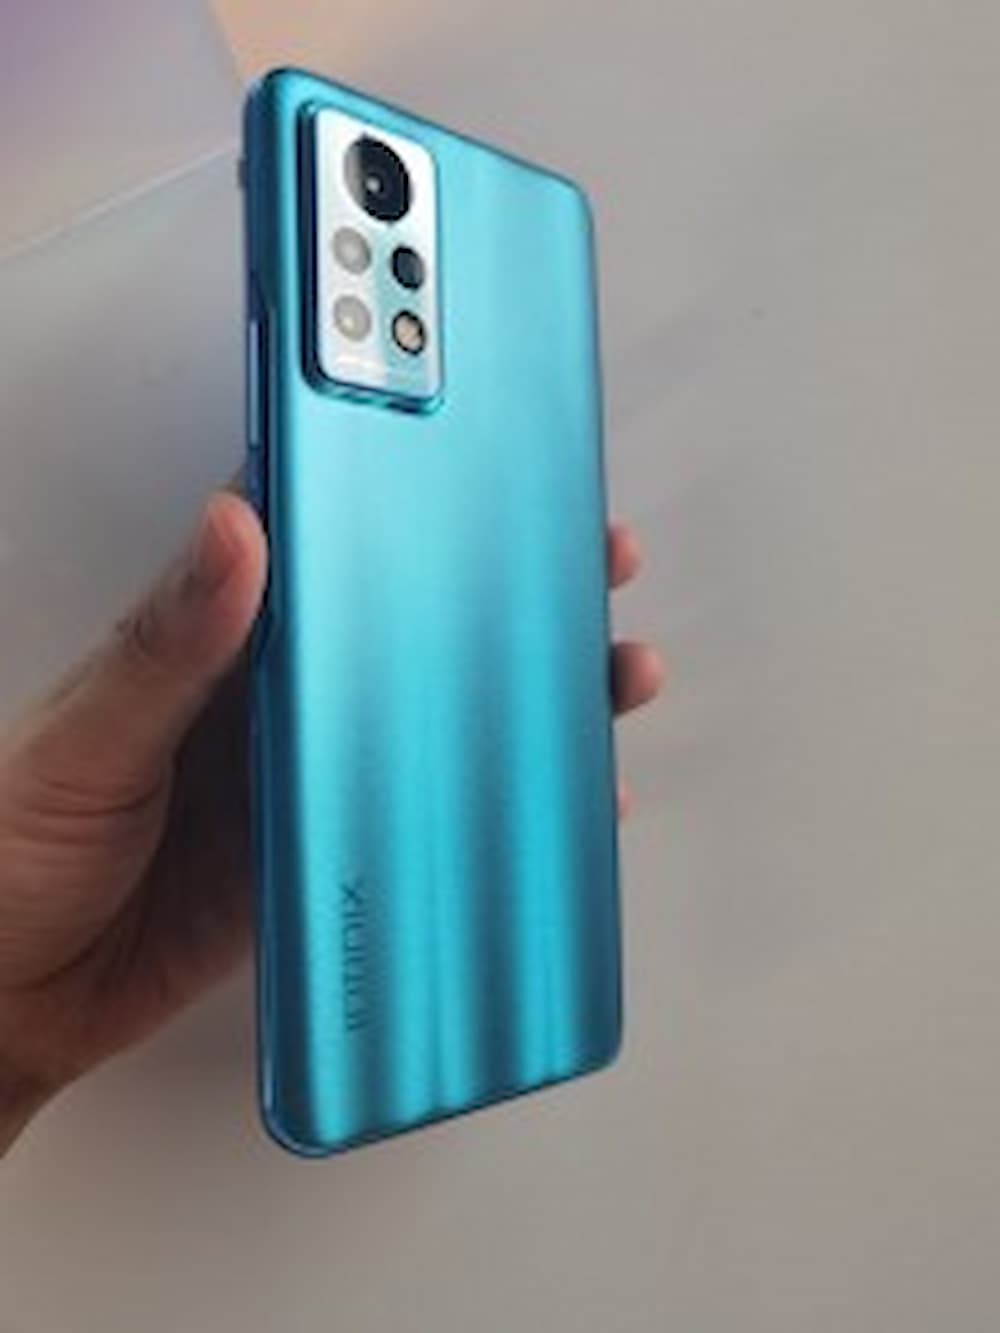 The New Infinix Note Model Might Have Retouched UI